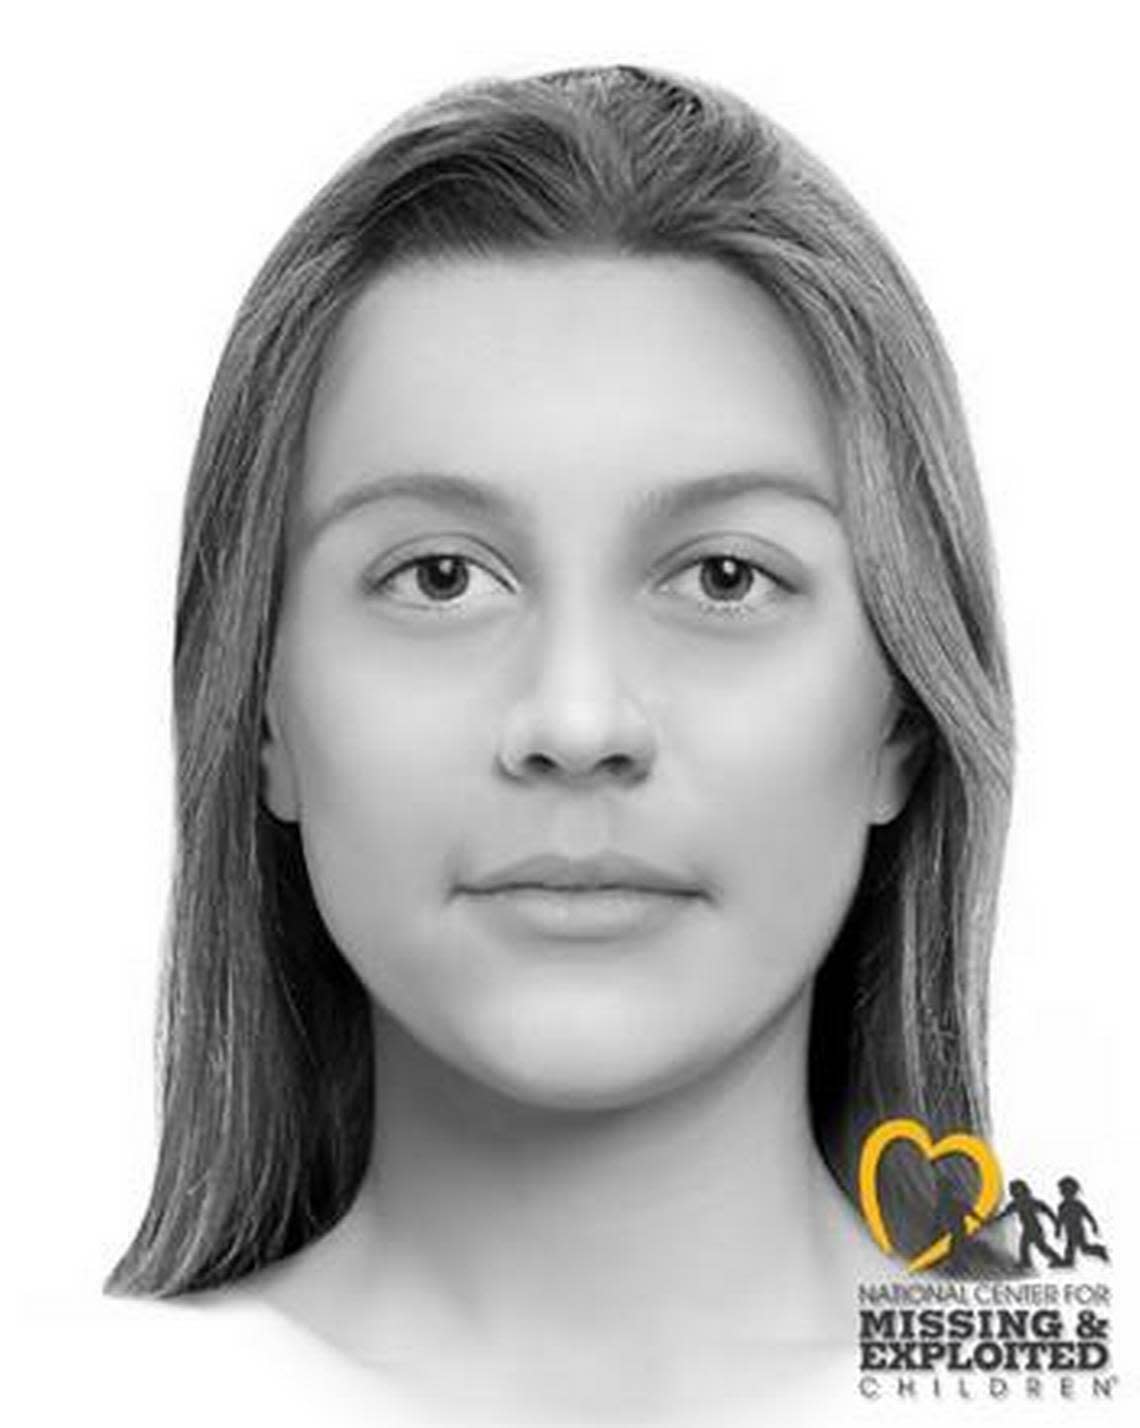 A facial reconstruction of what the Jane Doe found in New Mexico may have looked like. National Center for Missing and Exploited Children.